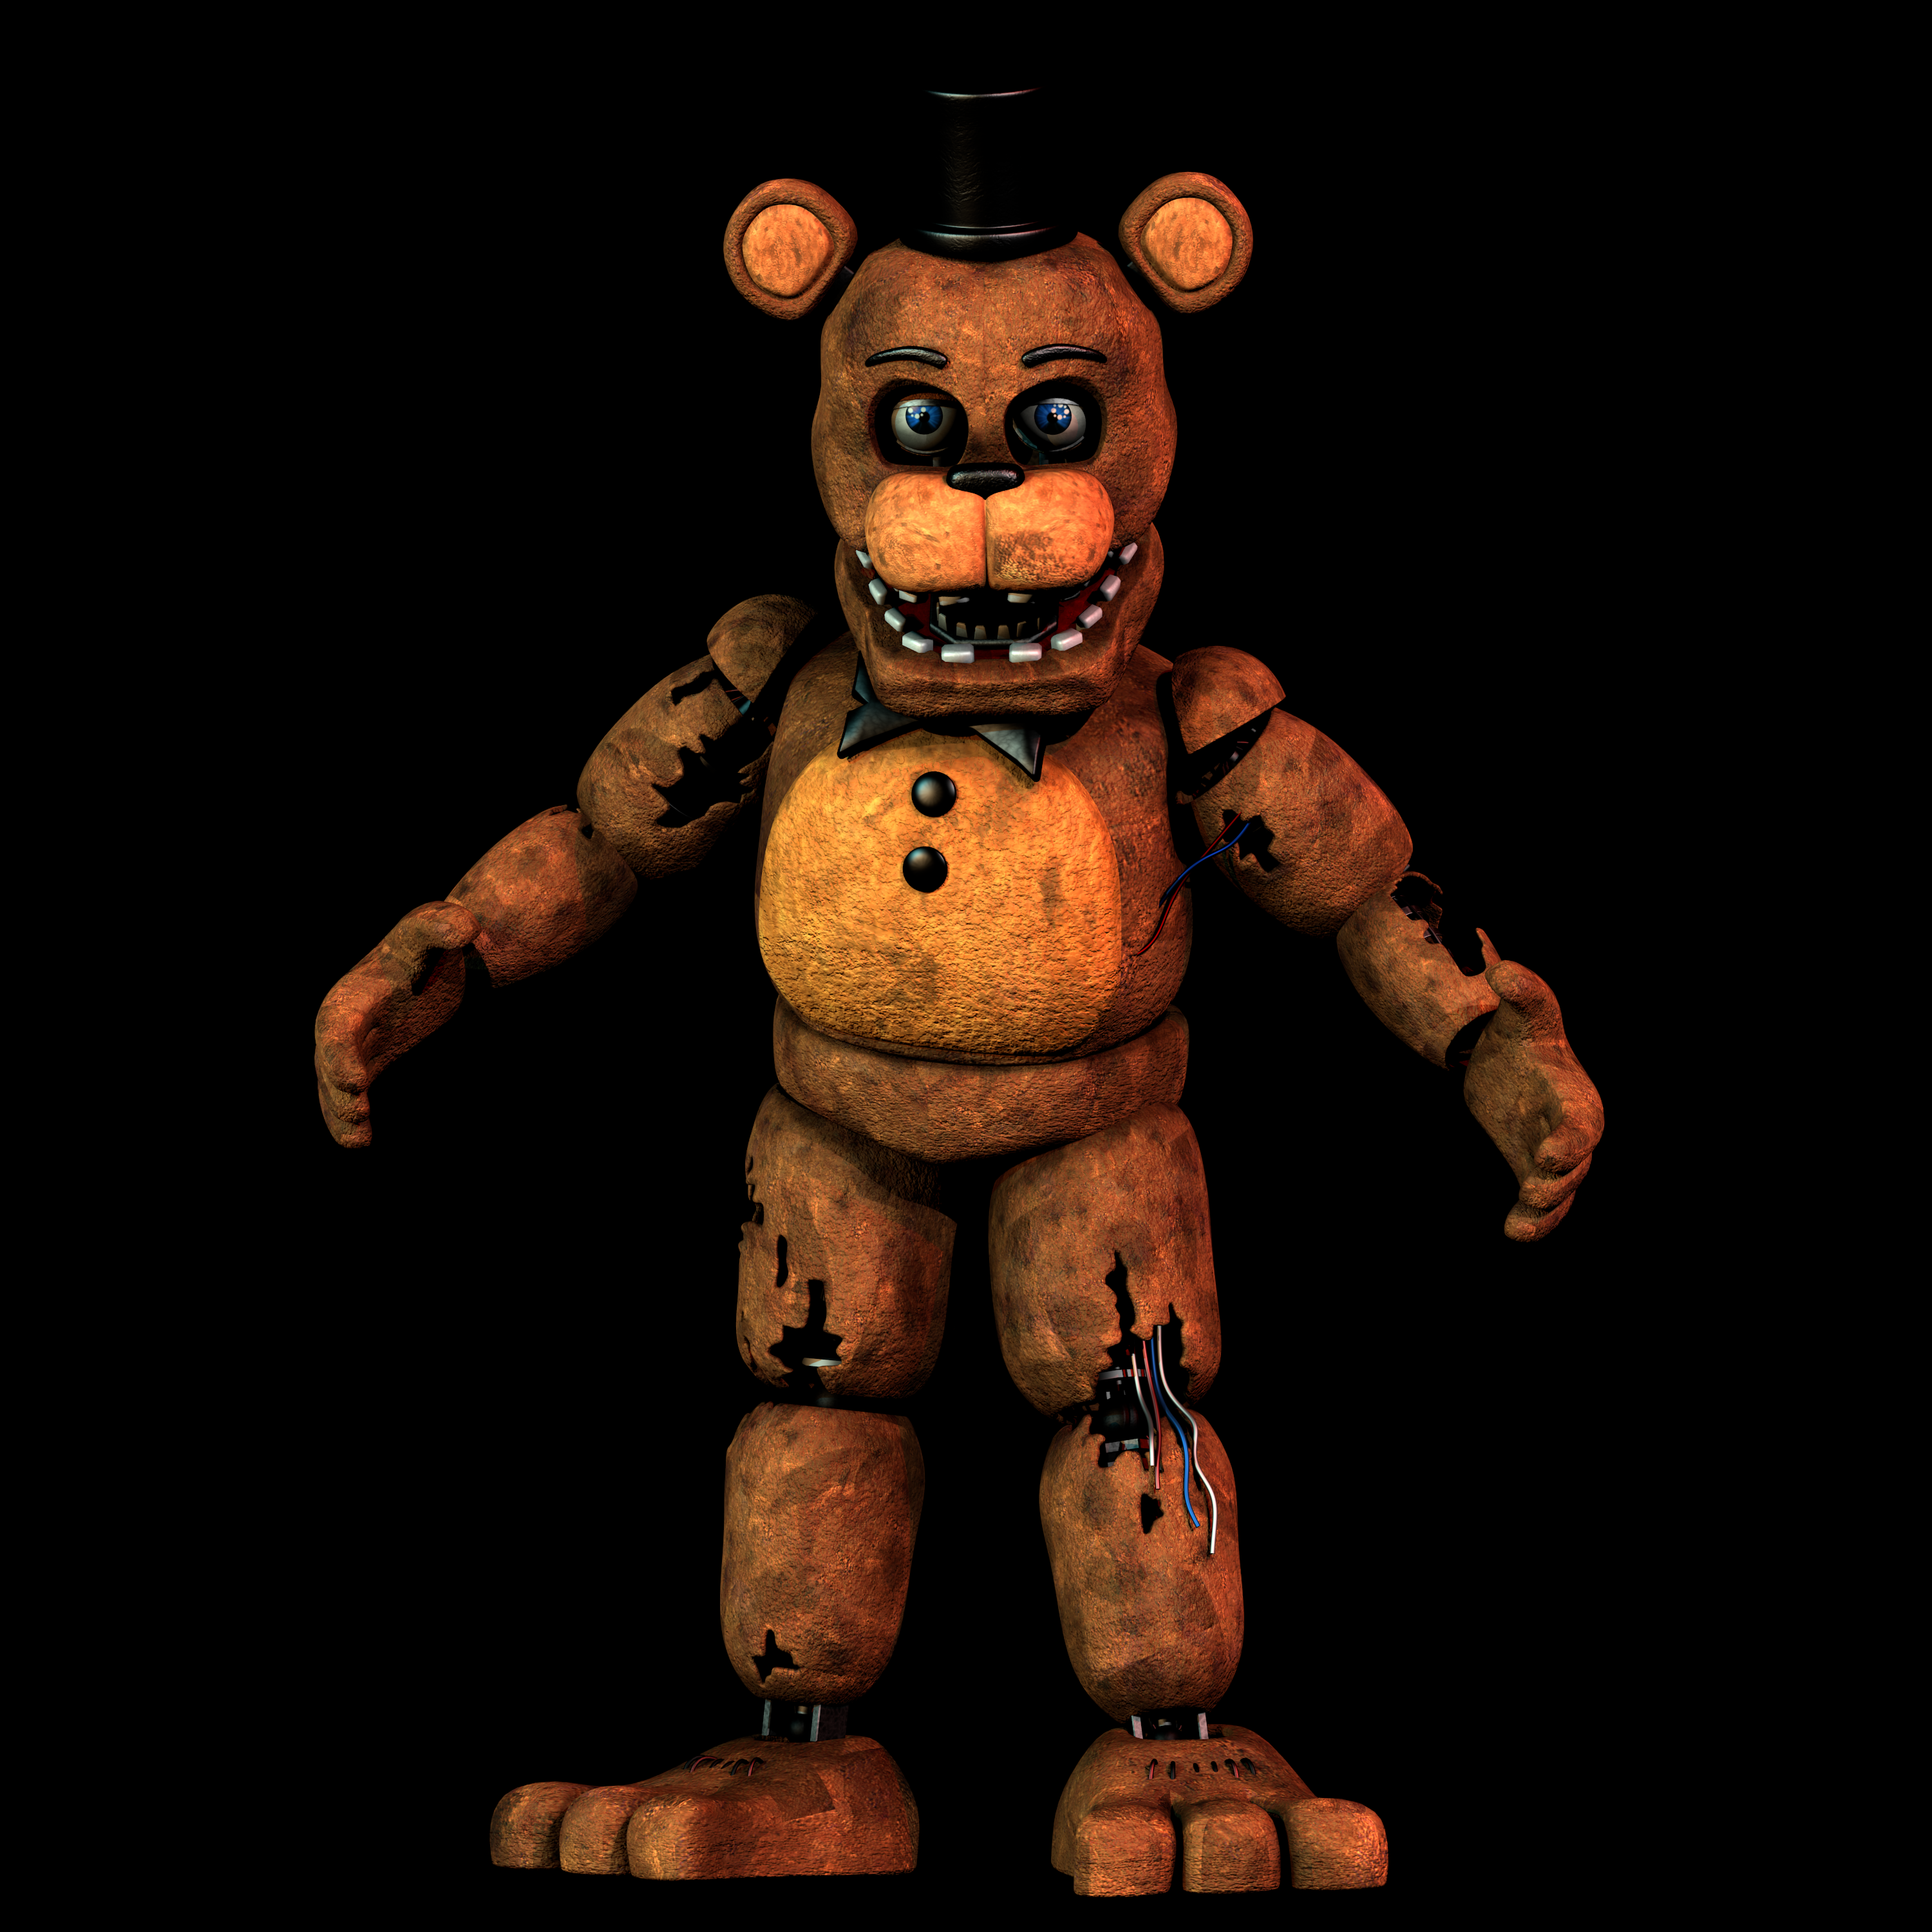 withered freddy render by rjac25 on deviantart.